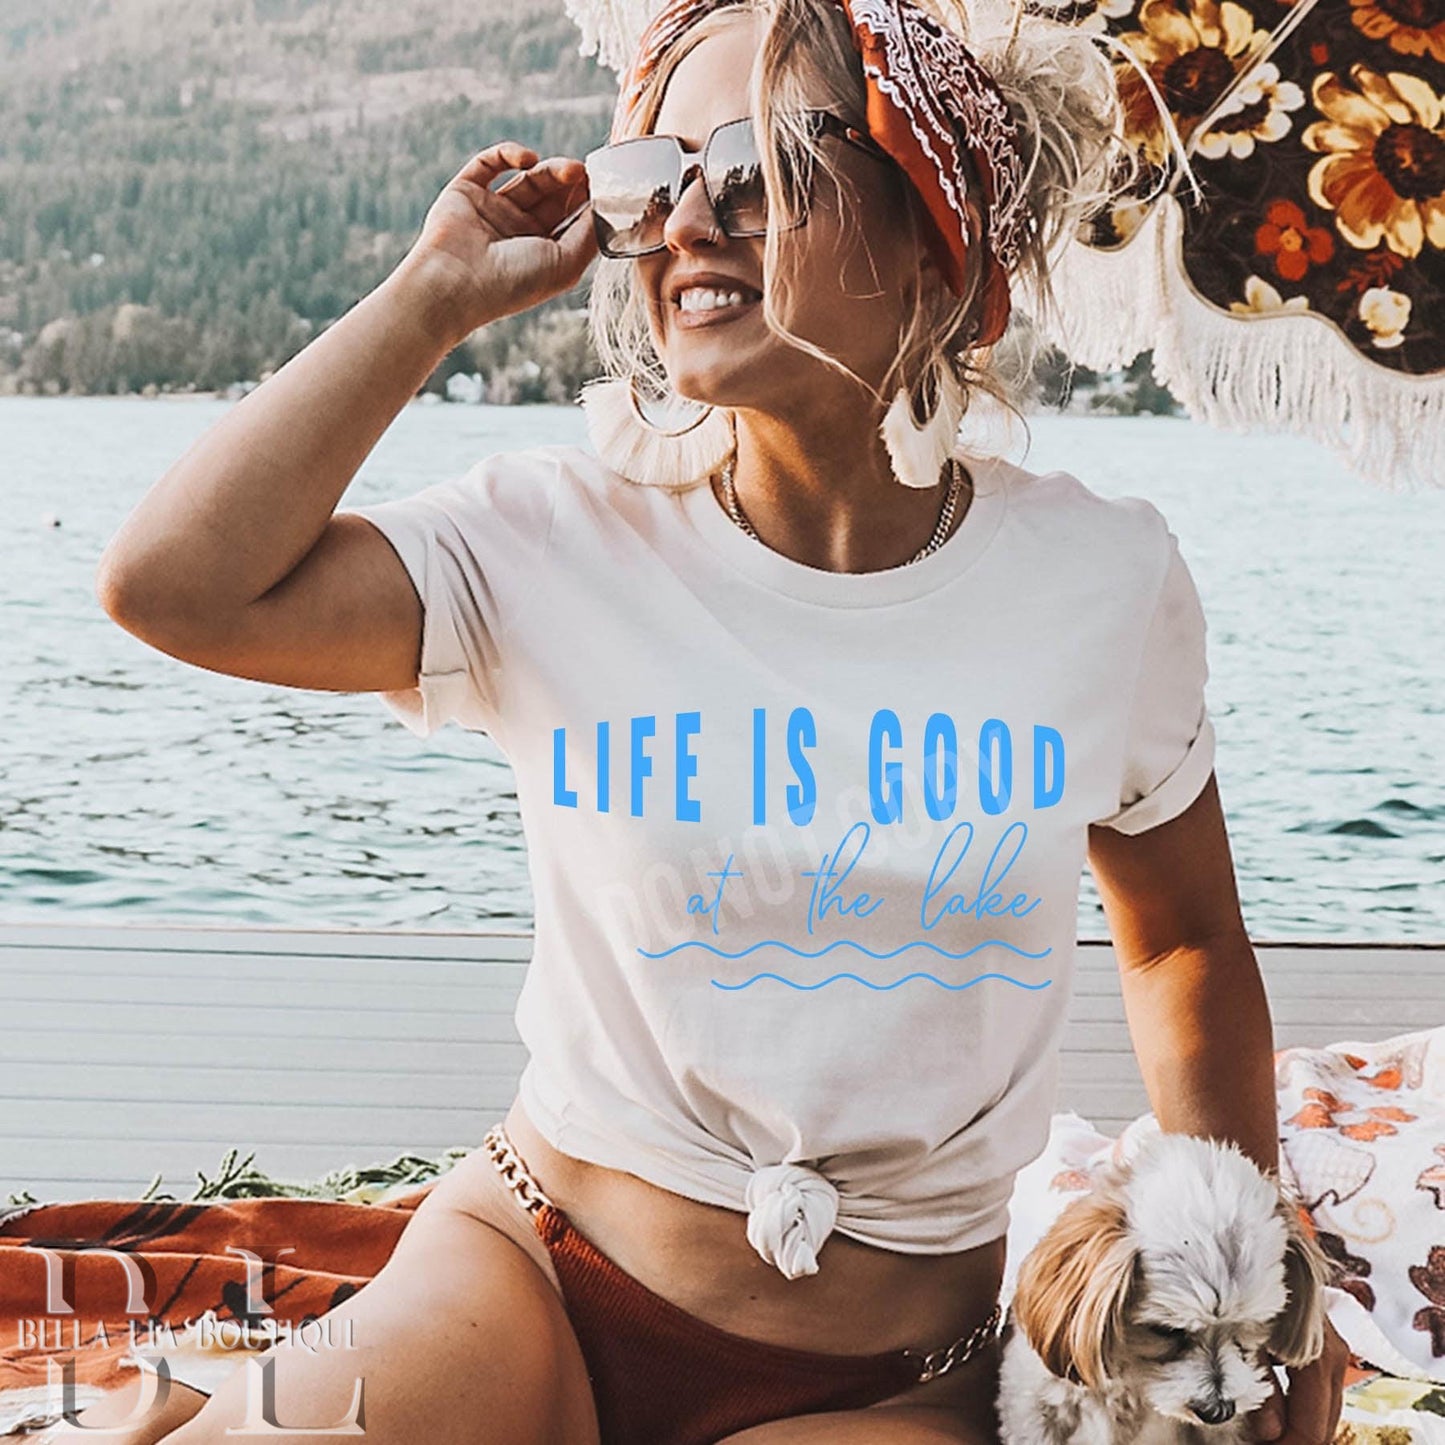 Life is Good at the Lake Graphic Tee or Sweatshirt - Bella Lia Boutique